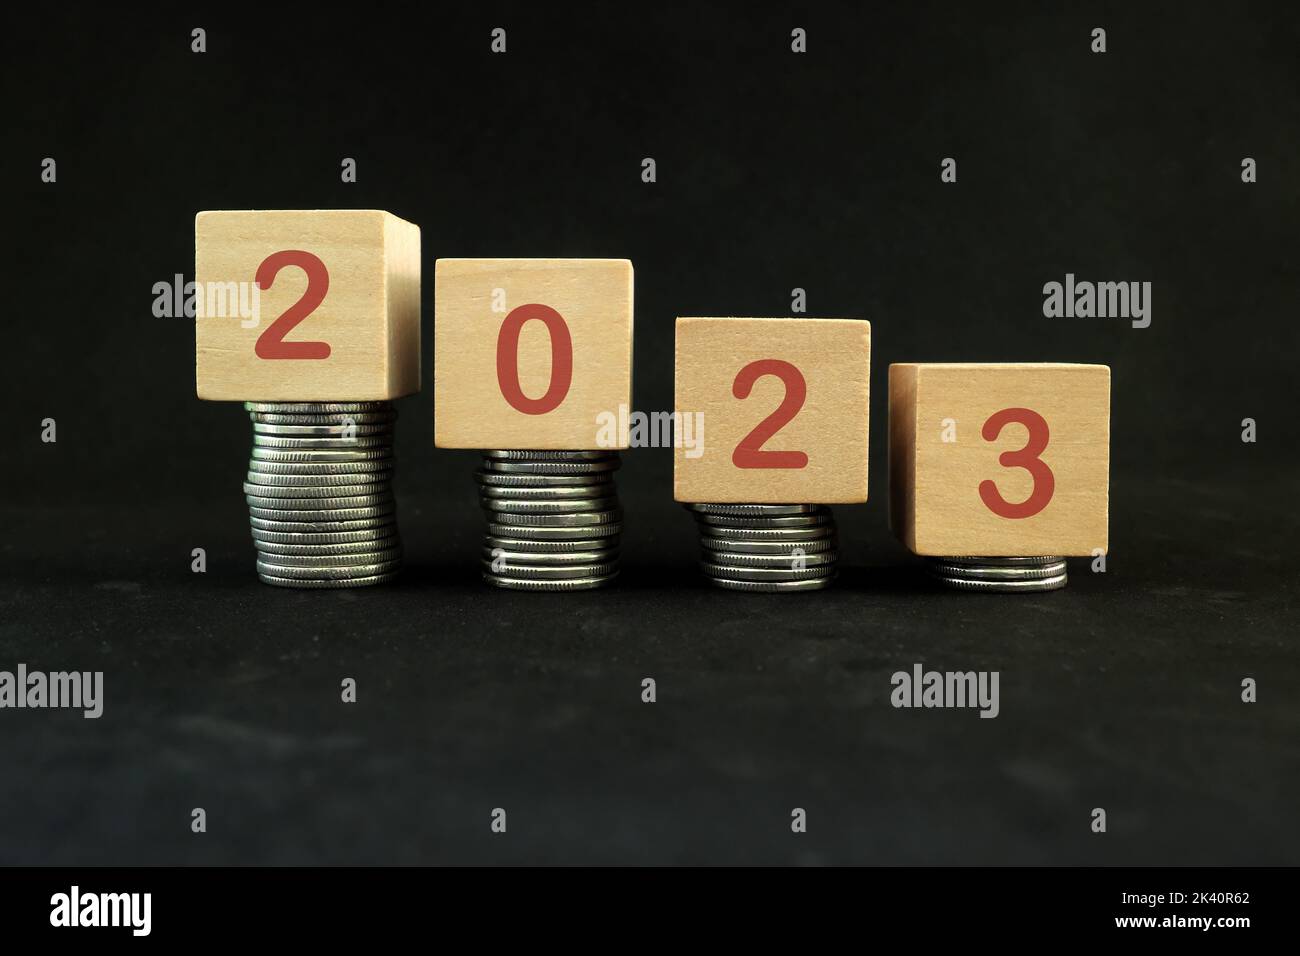 Year 2023 economic recession, financial crisis and bankruptcy concept. Decreasing stack of coins in dark black background. Stock Photo